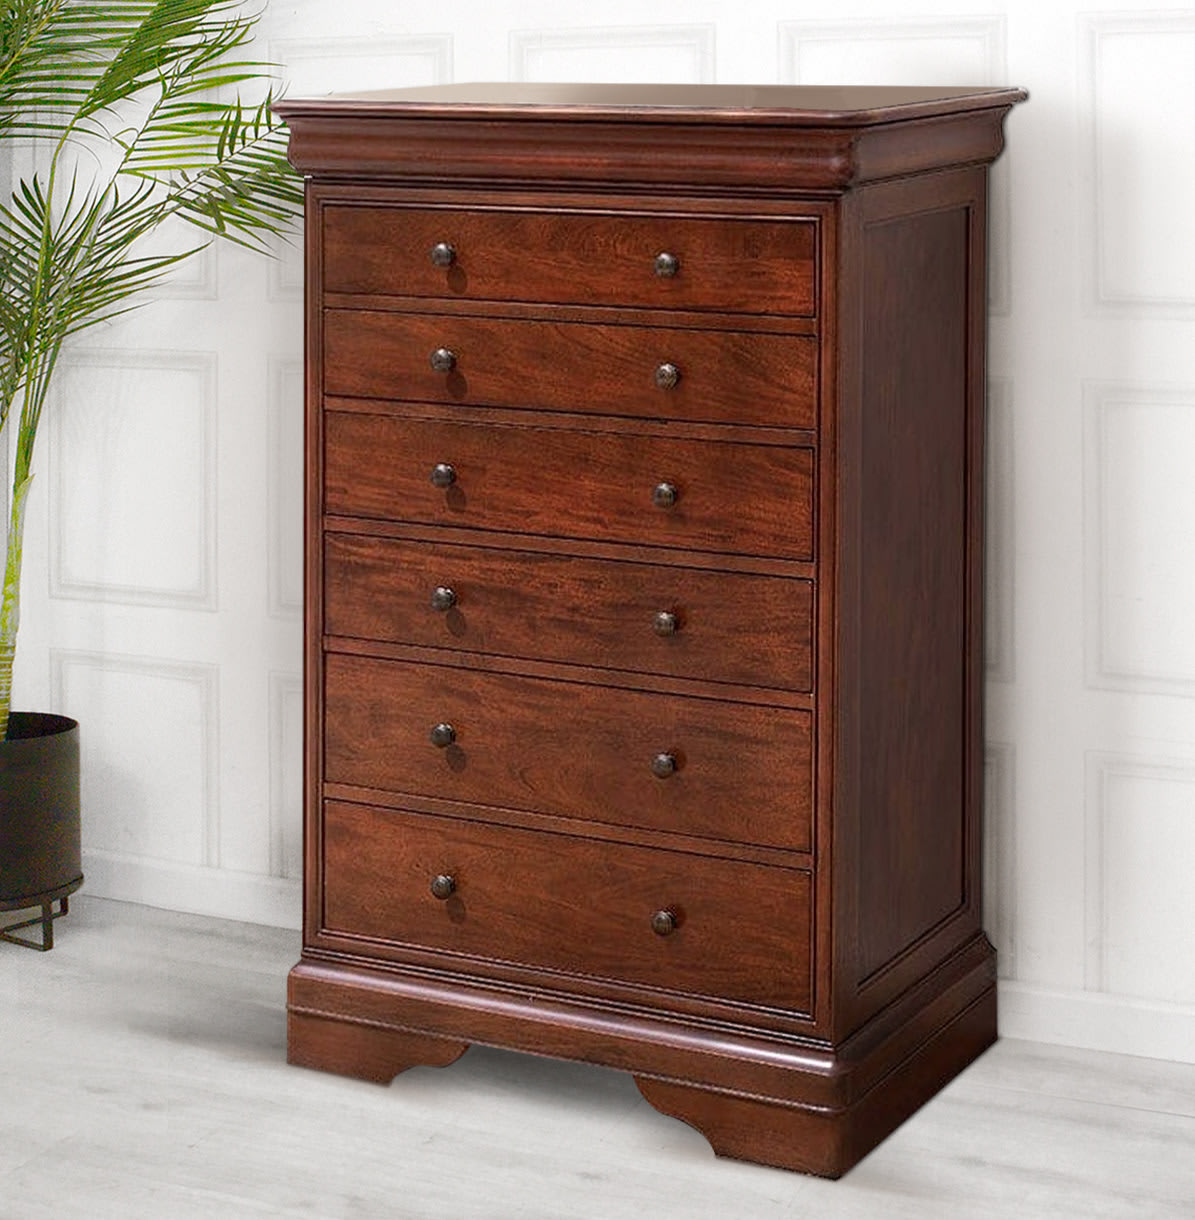 Willis & Gambier Antoinette 6 Drawer Tall Chest of Drawers | Nicky Cornell a UK stockist